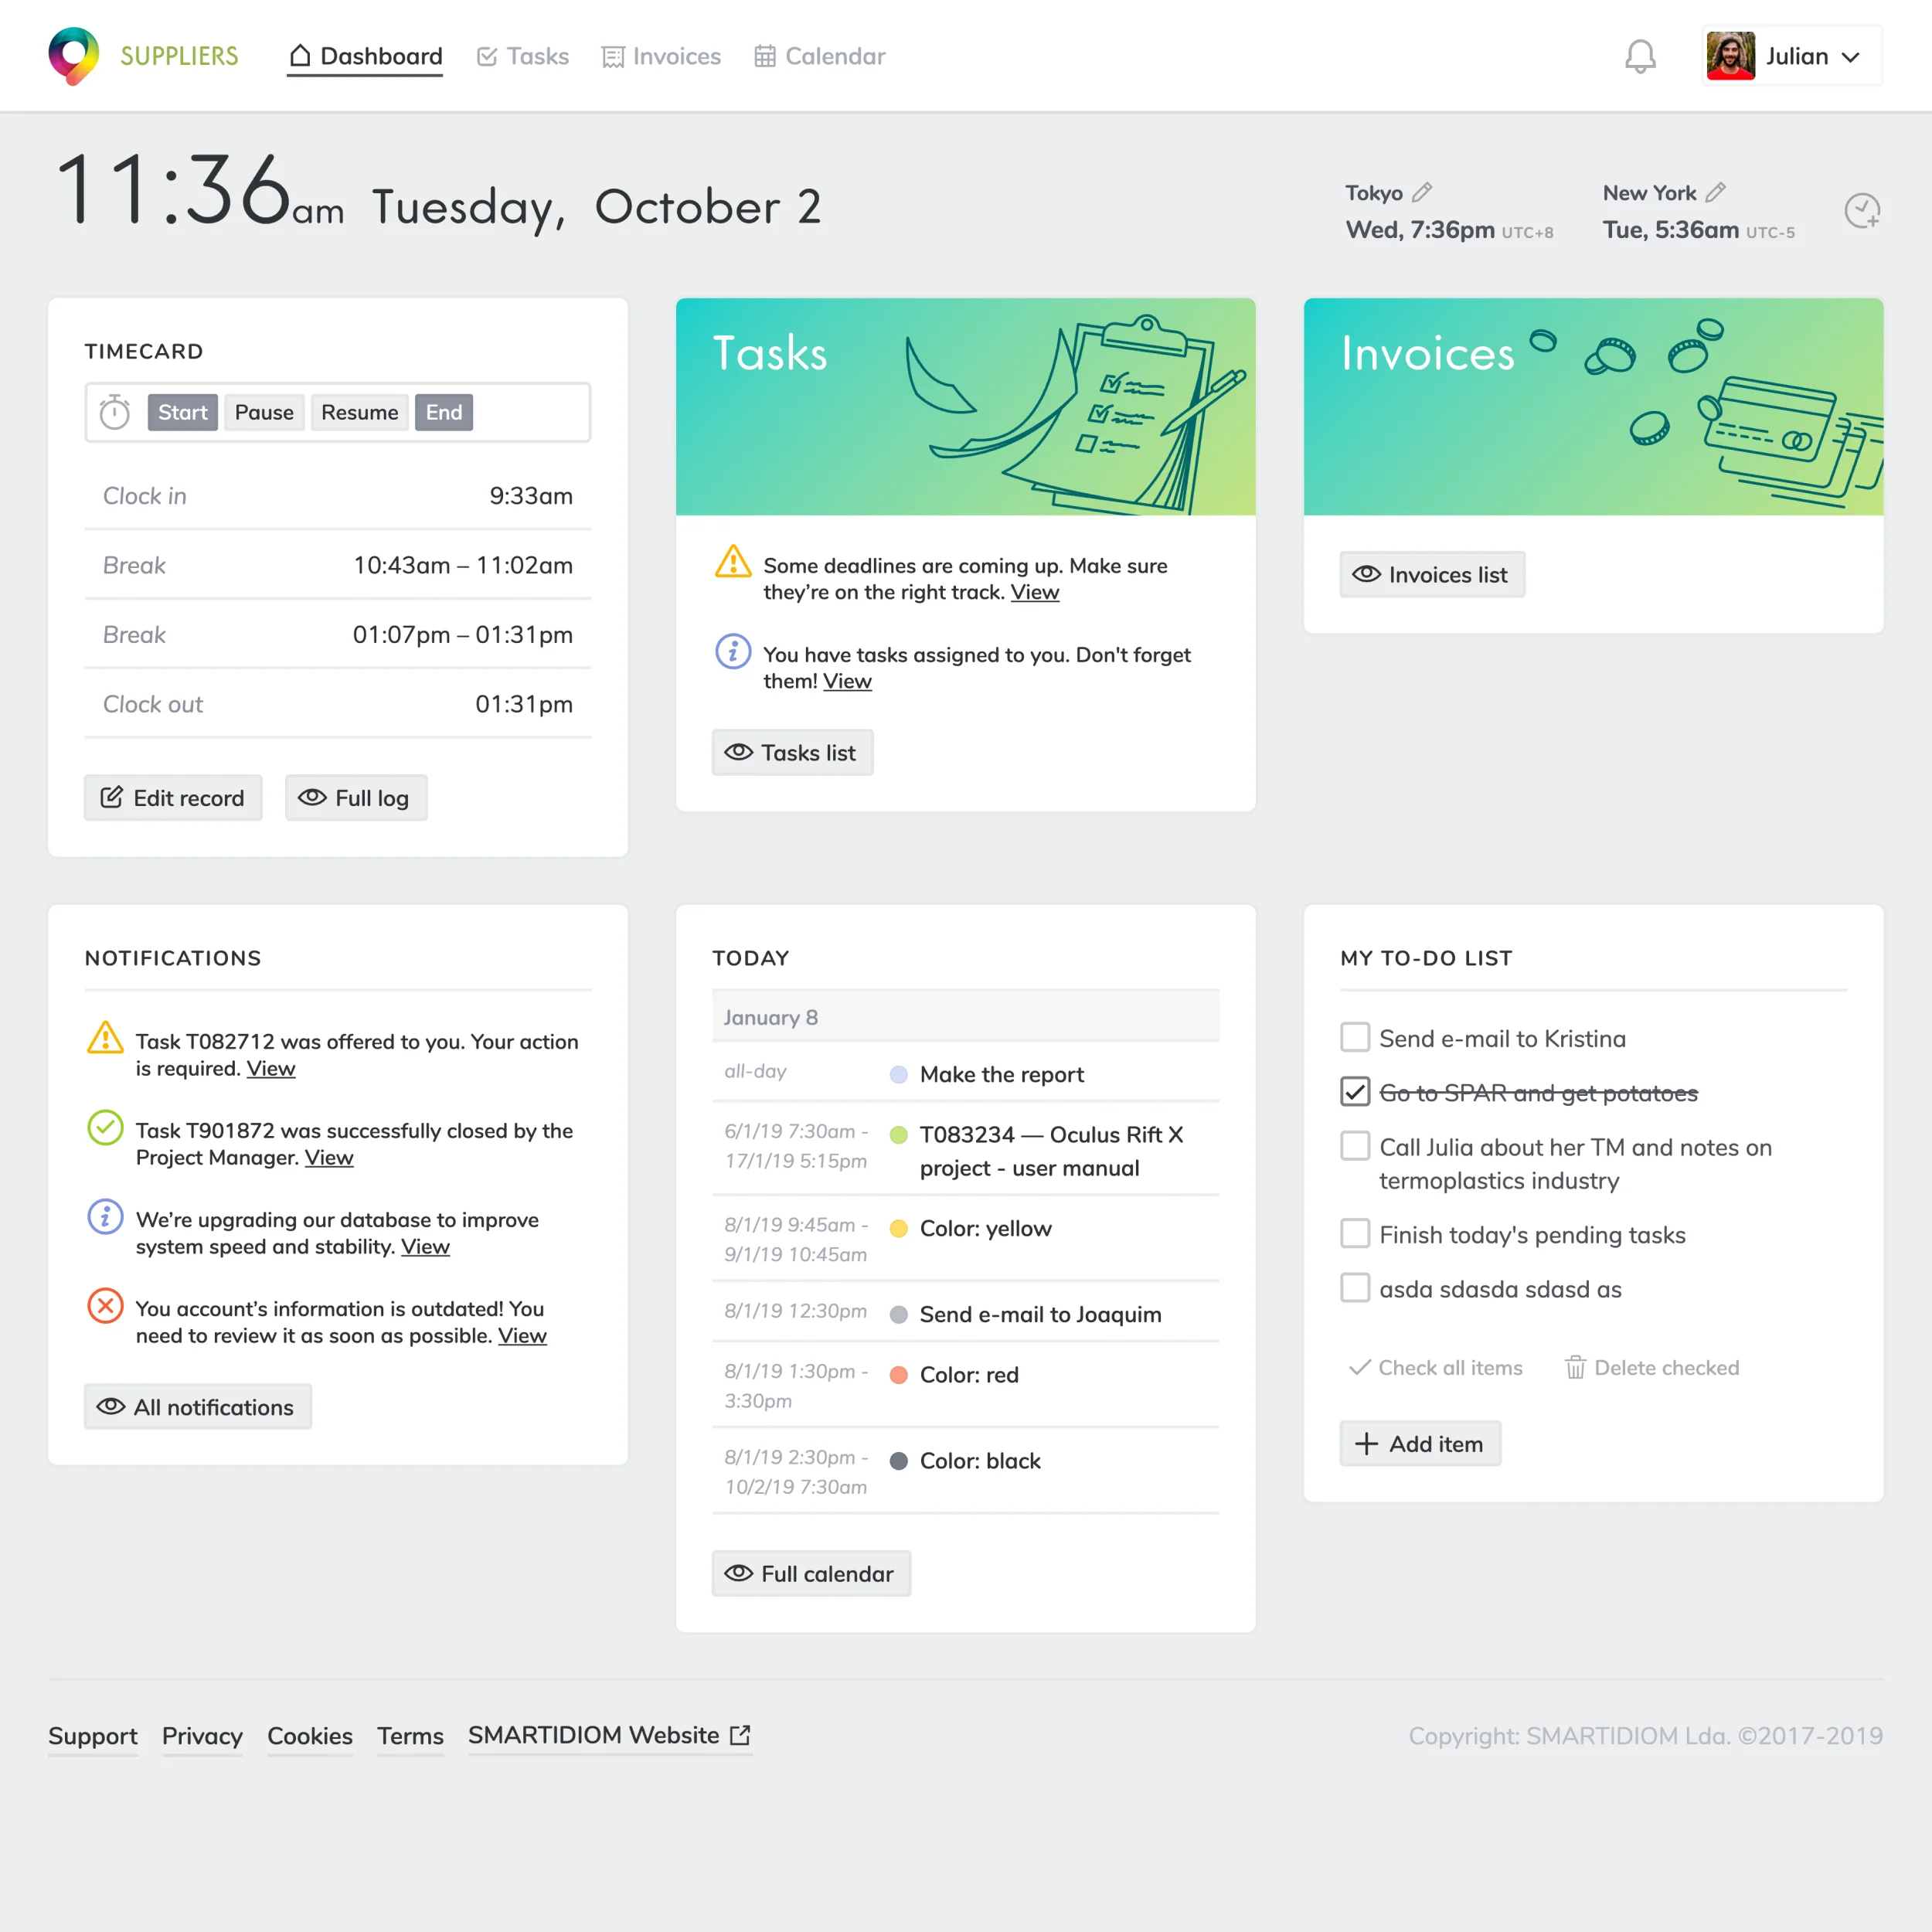 View of a task management app dashboard with related widgets like a list of tasks, invoices, to-do lists, notifications, and other task management functionalities.